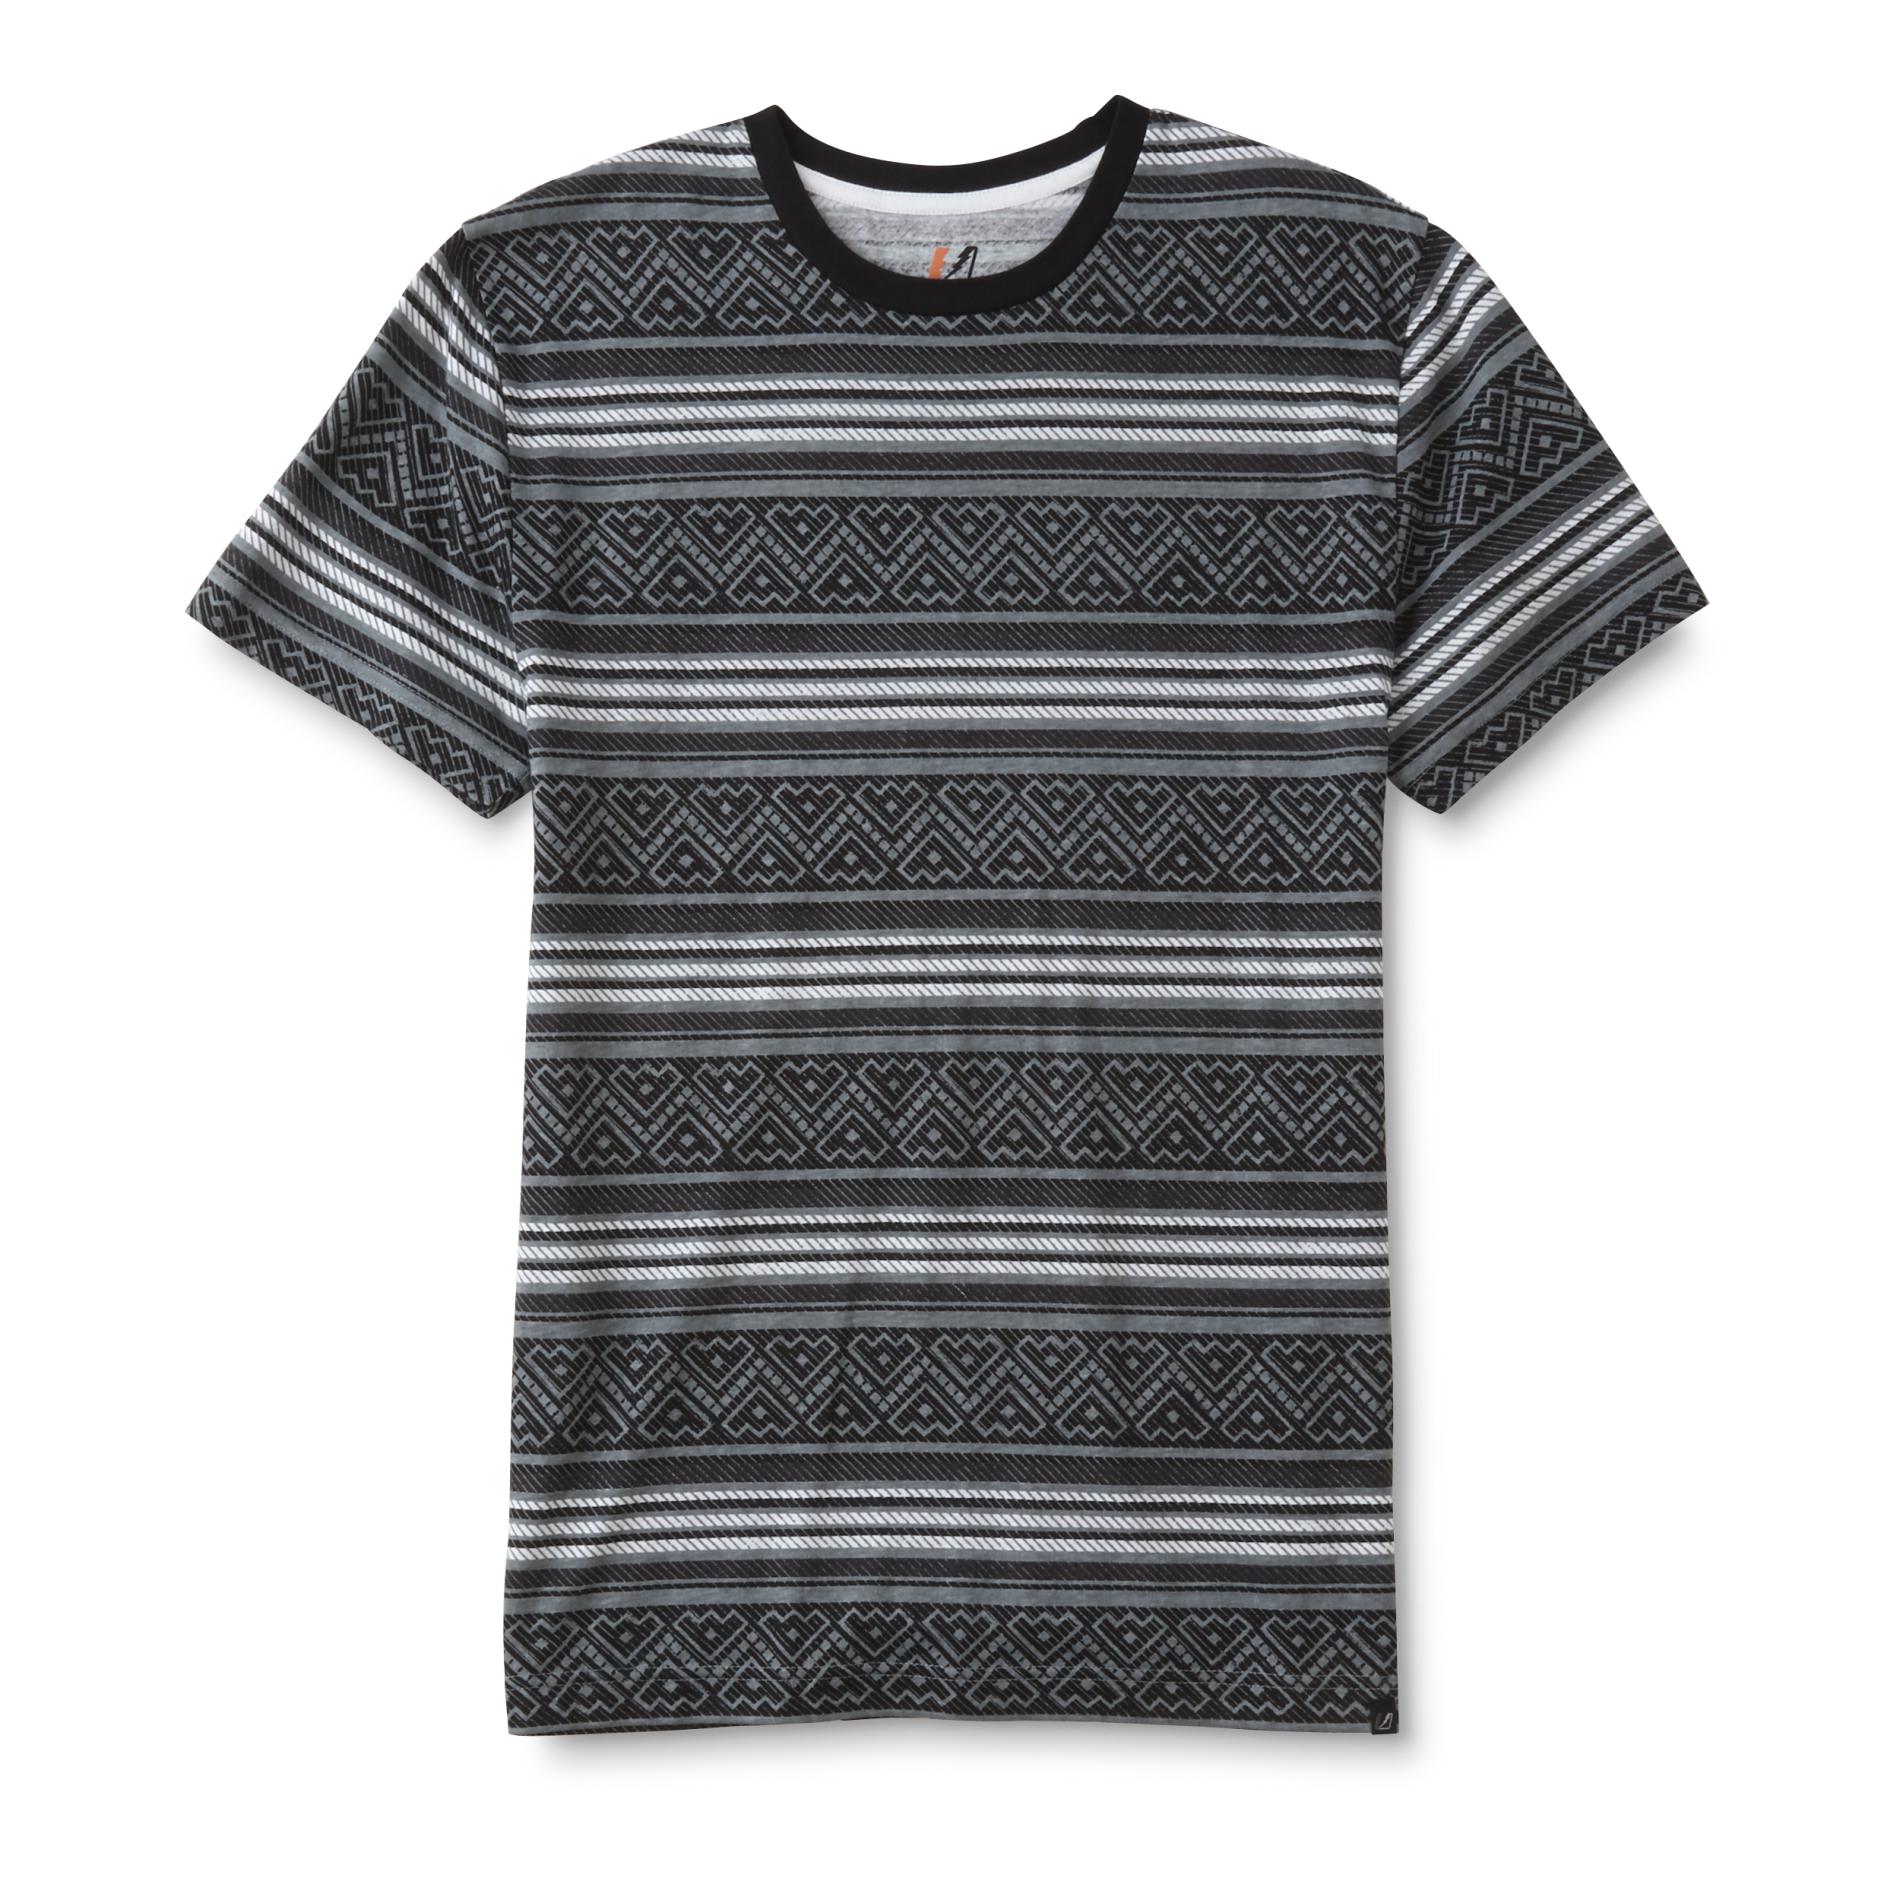 Amplify Young Men's T-Shirt - Tribal Striped